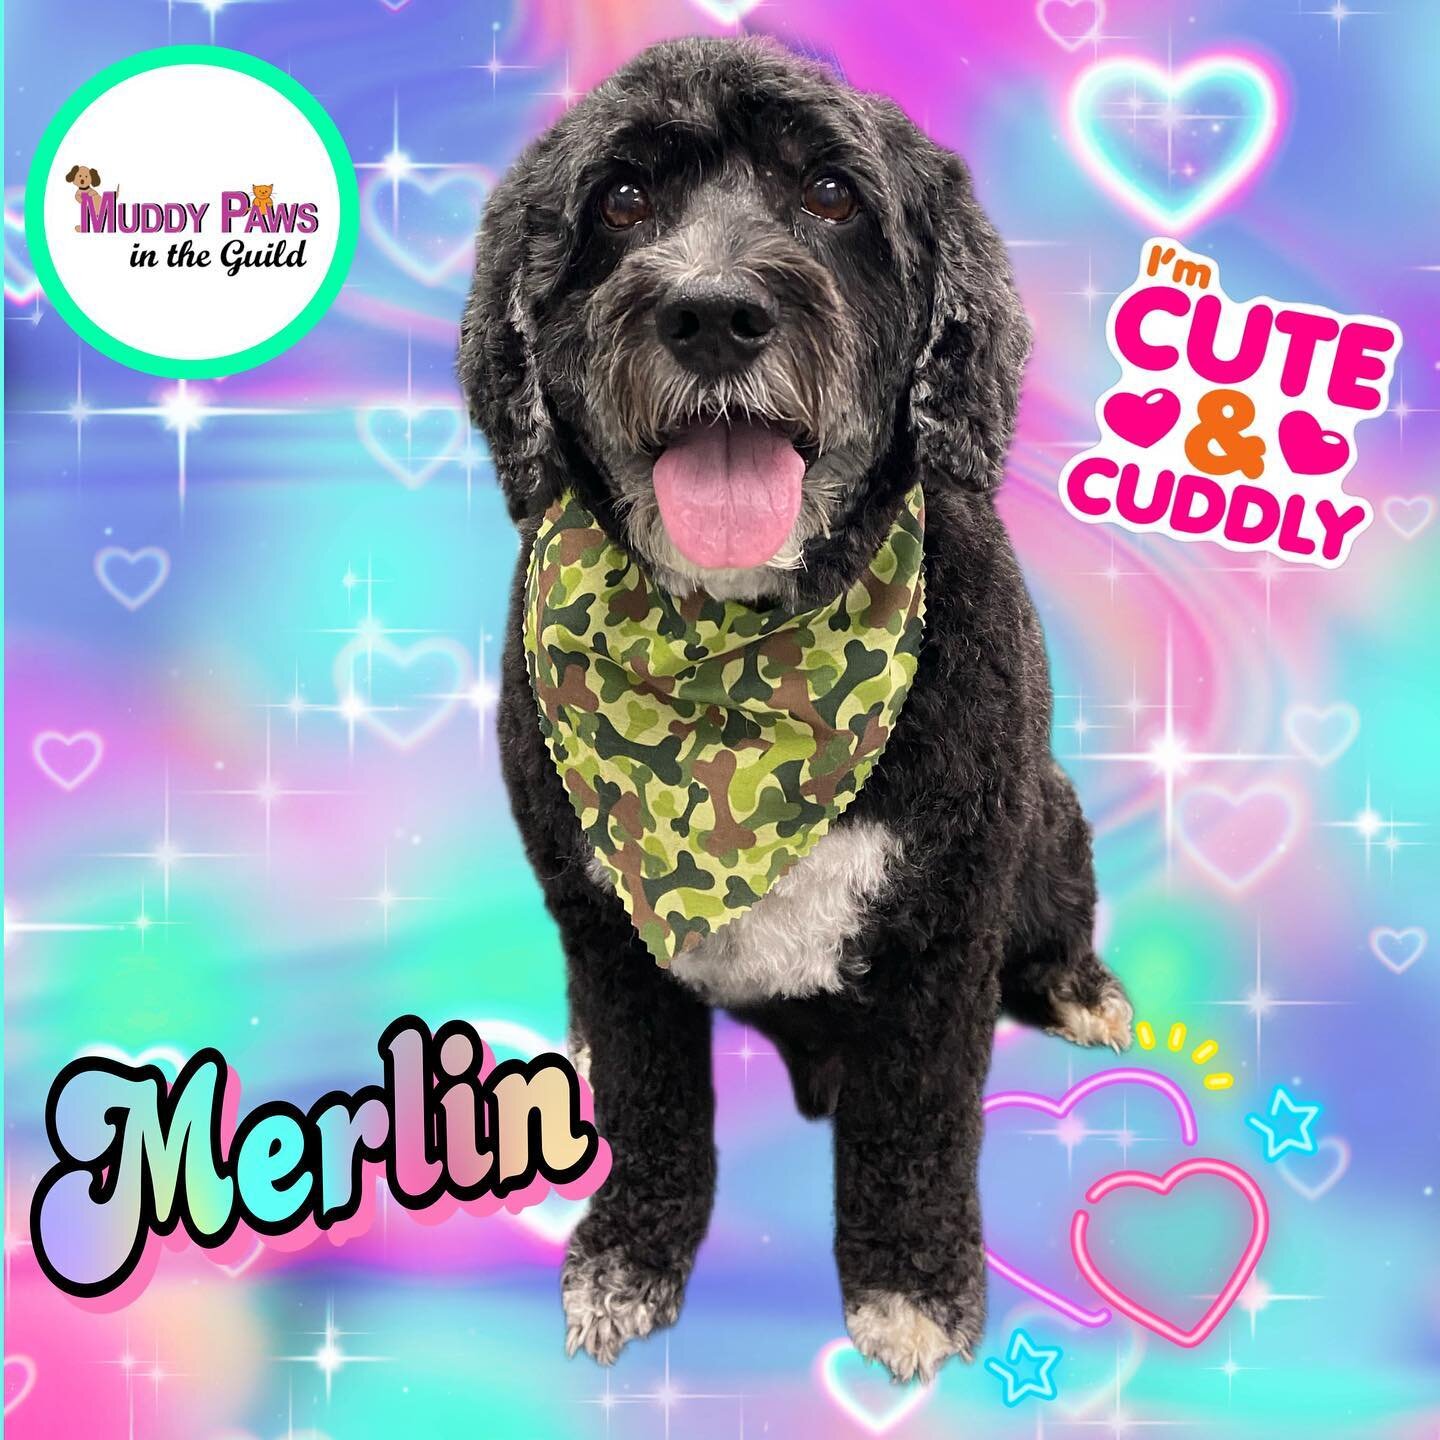 Give us a call to book your FURBABIES summertime grooming. We &hearts;️ your pet&hearts;️🥰MuddyPawsGuildwood ⭕️❌💜💚 ❤️❤️ 🐾 ARF!!! ARF!!! #petgroomer #Guildwood #animallovers #pets #dogs #scarborough #cats #thegroomercares #premiumpetfood #petfoods